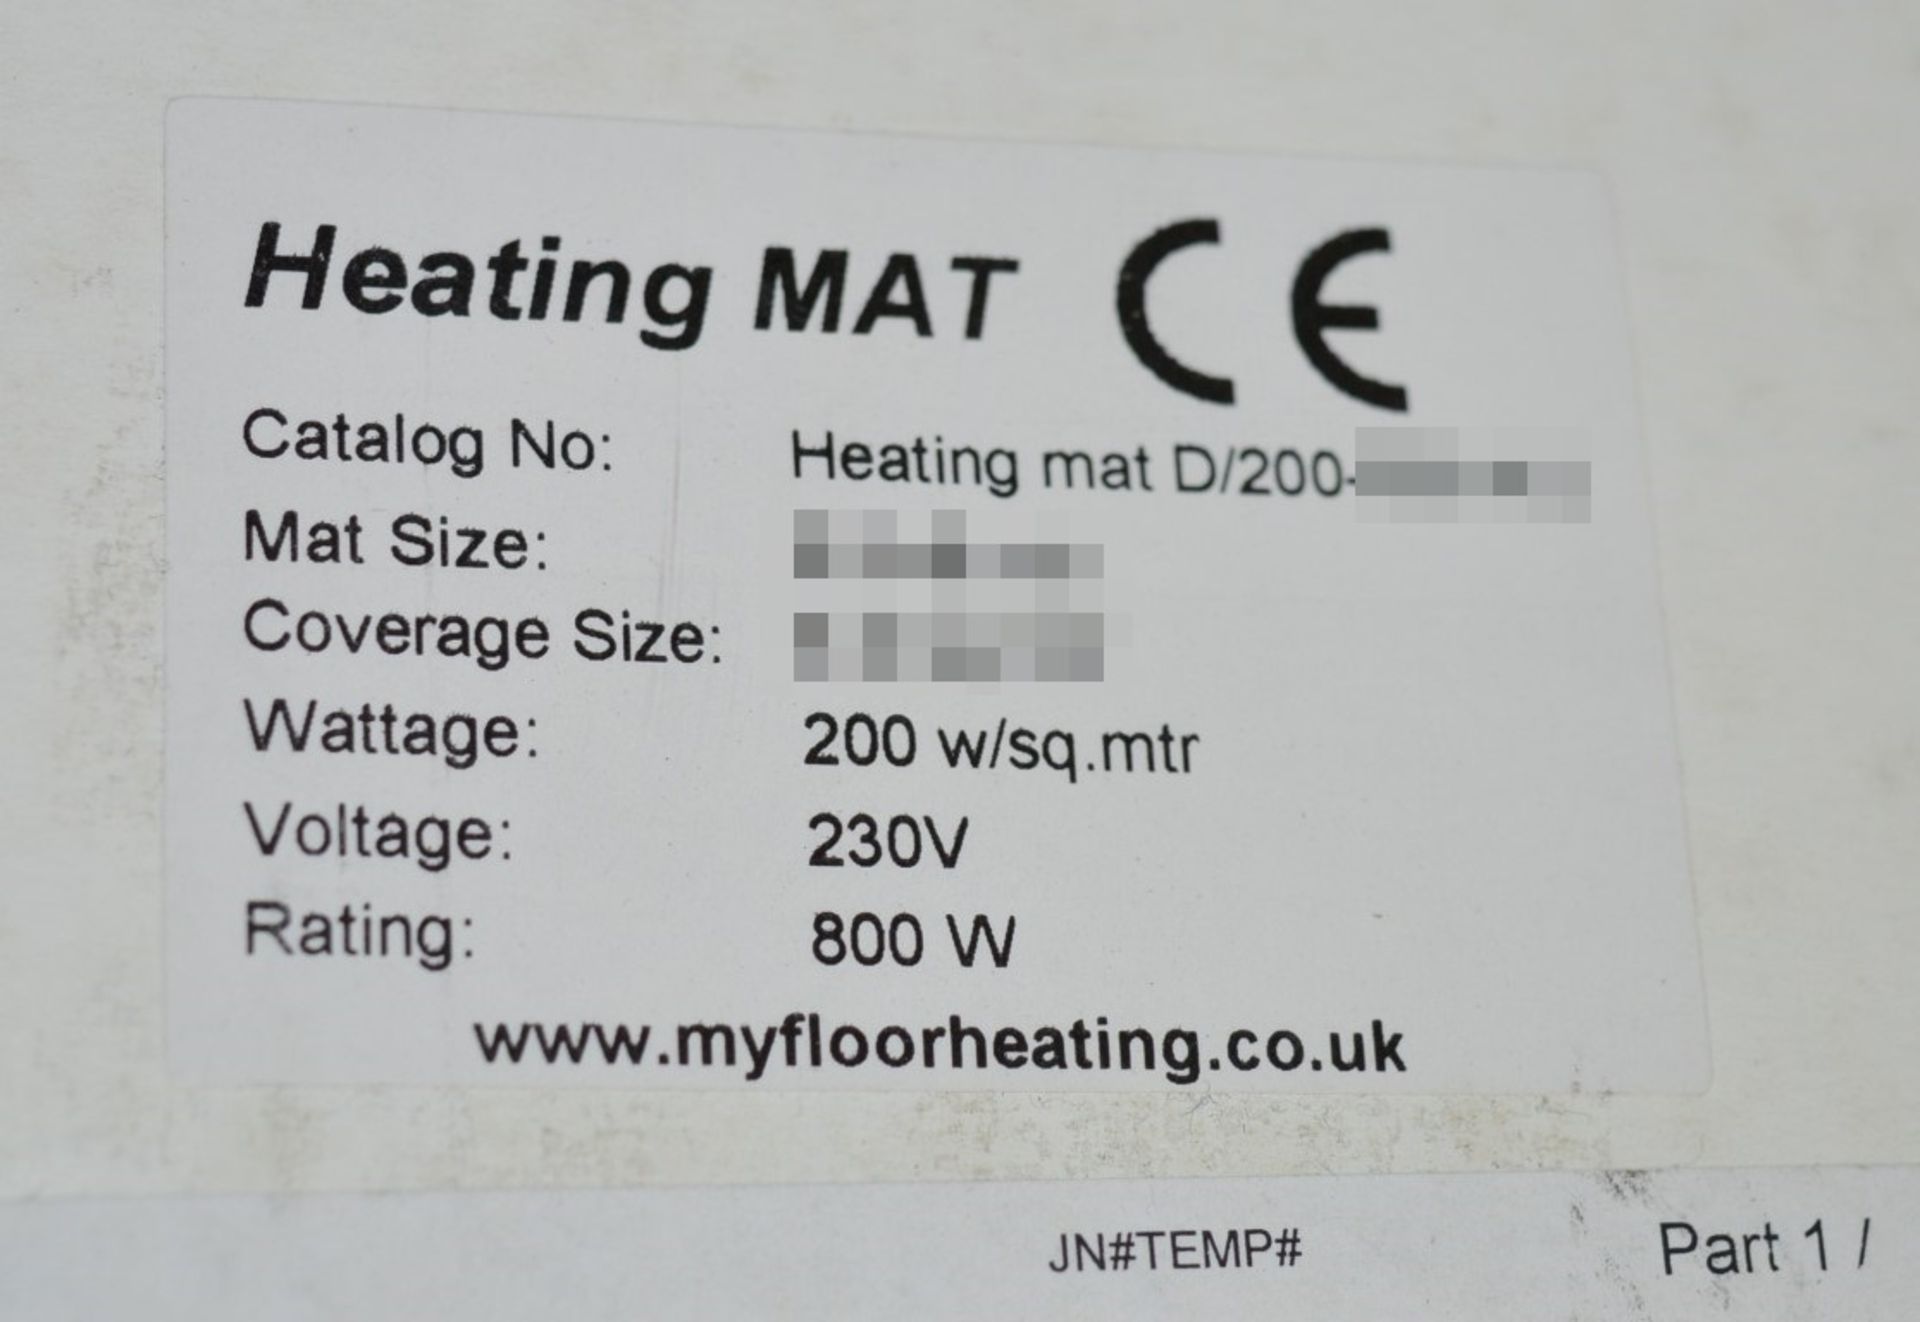 1 x Underfloor Heating System by MyFloorHeating - Covers 5 Square Meters - Includes 0.5 x 10m - Image 6 of 12